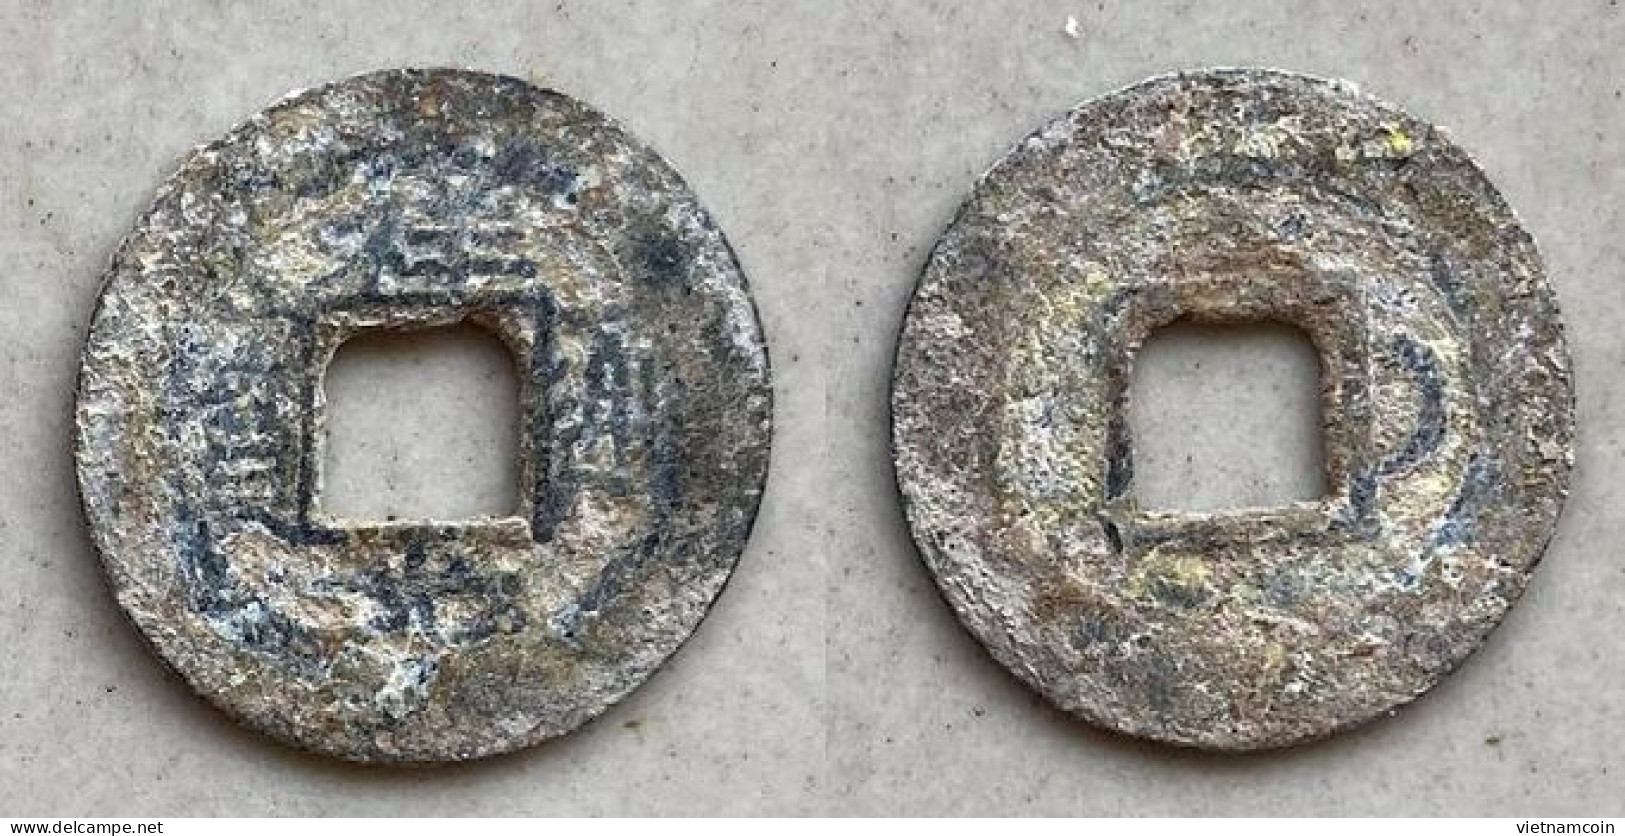 Ancient Annam Coin Tuong Quang Thong Bao Reverse Right Moon (zinc Coin) THE NGUYEN LORDS (1558-1778) - Vietnam